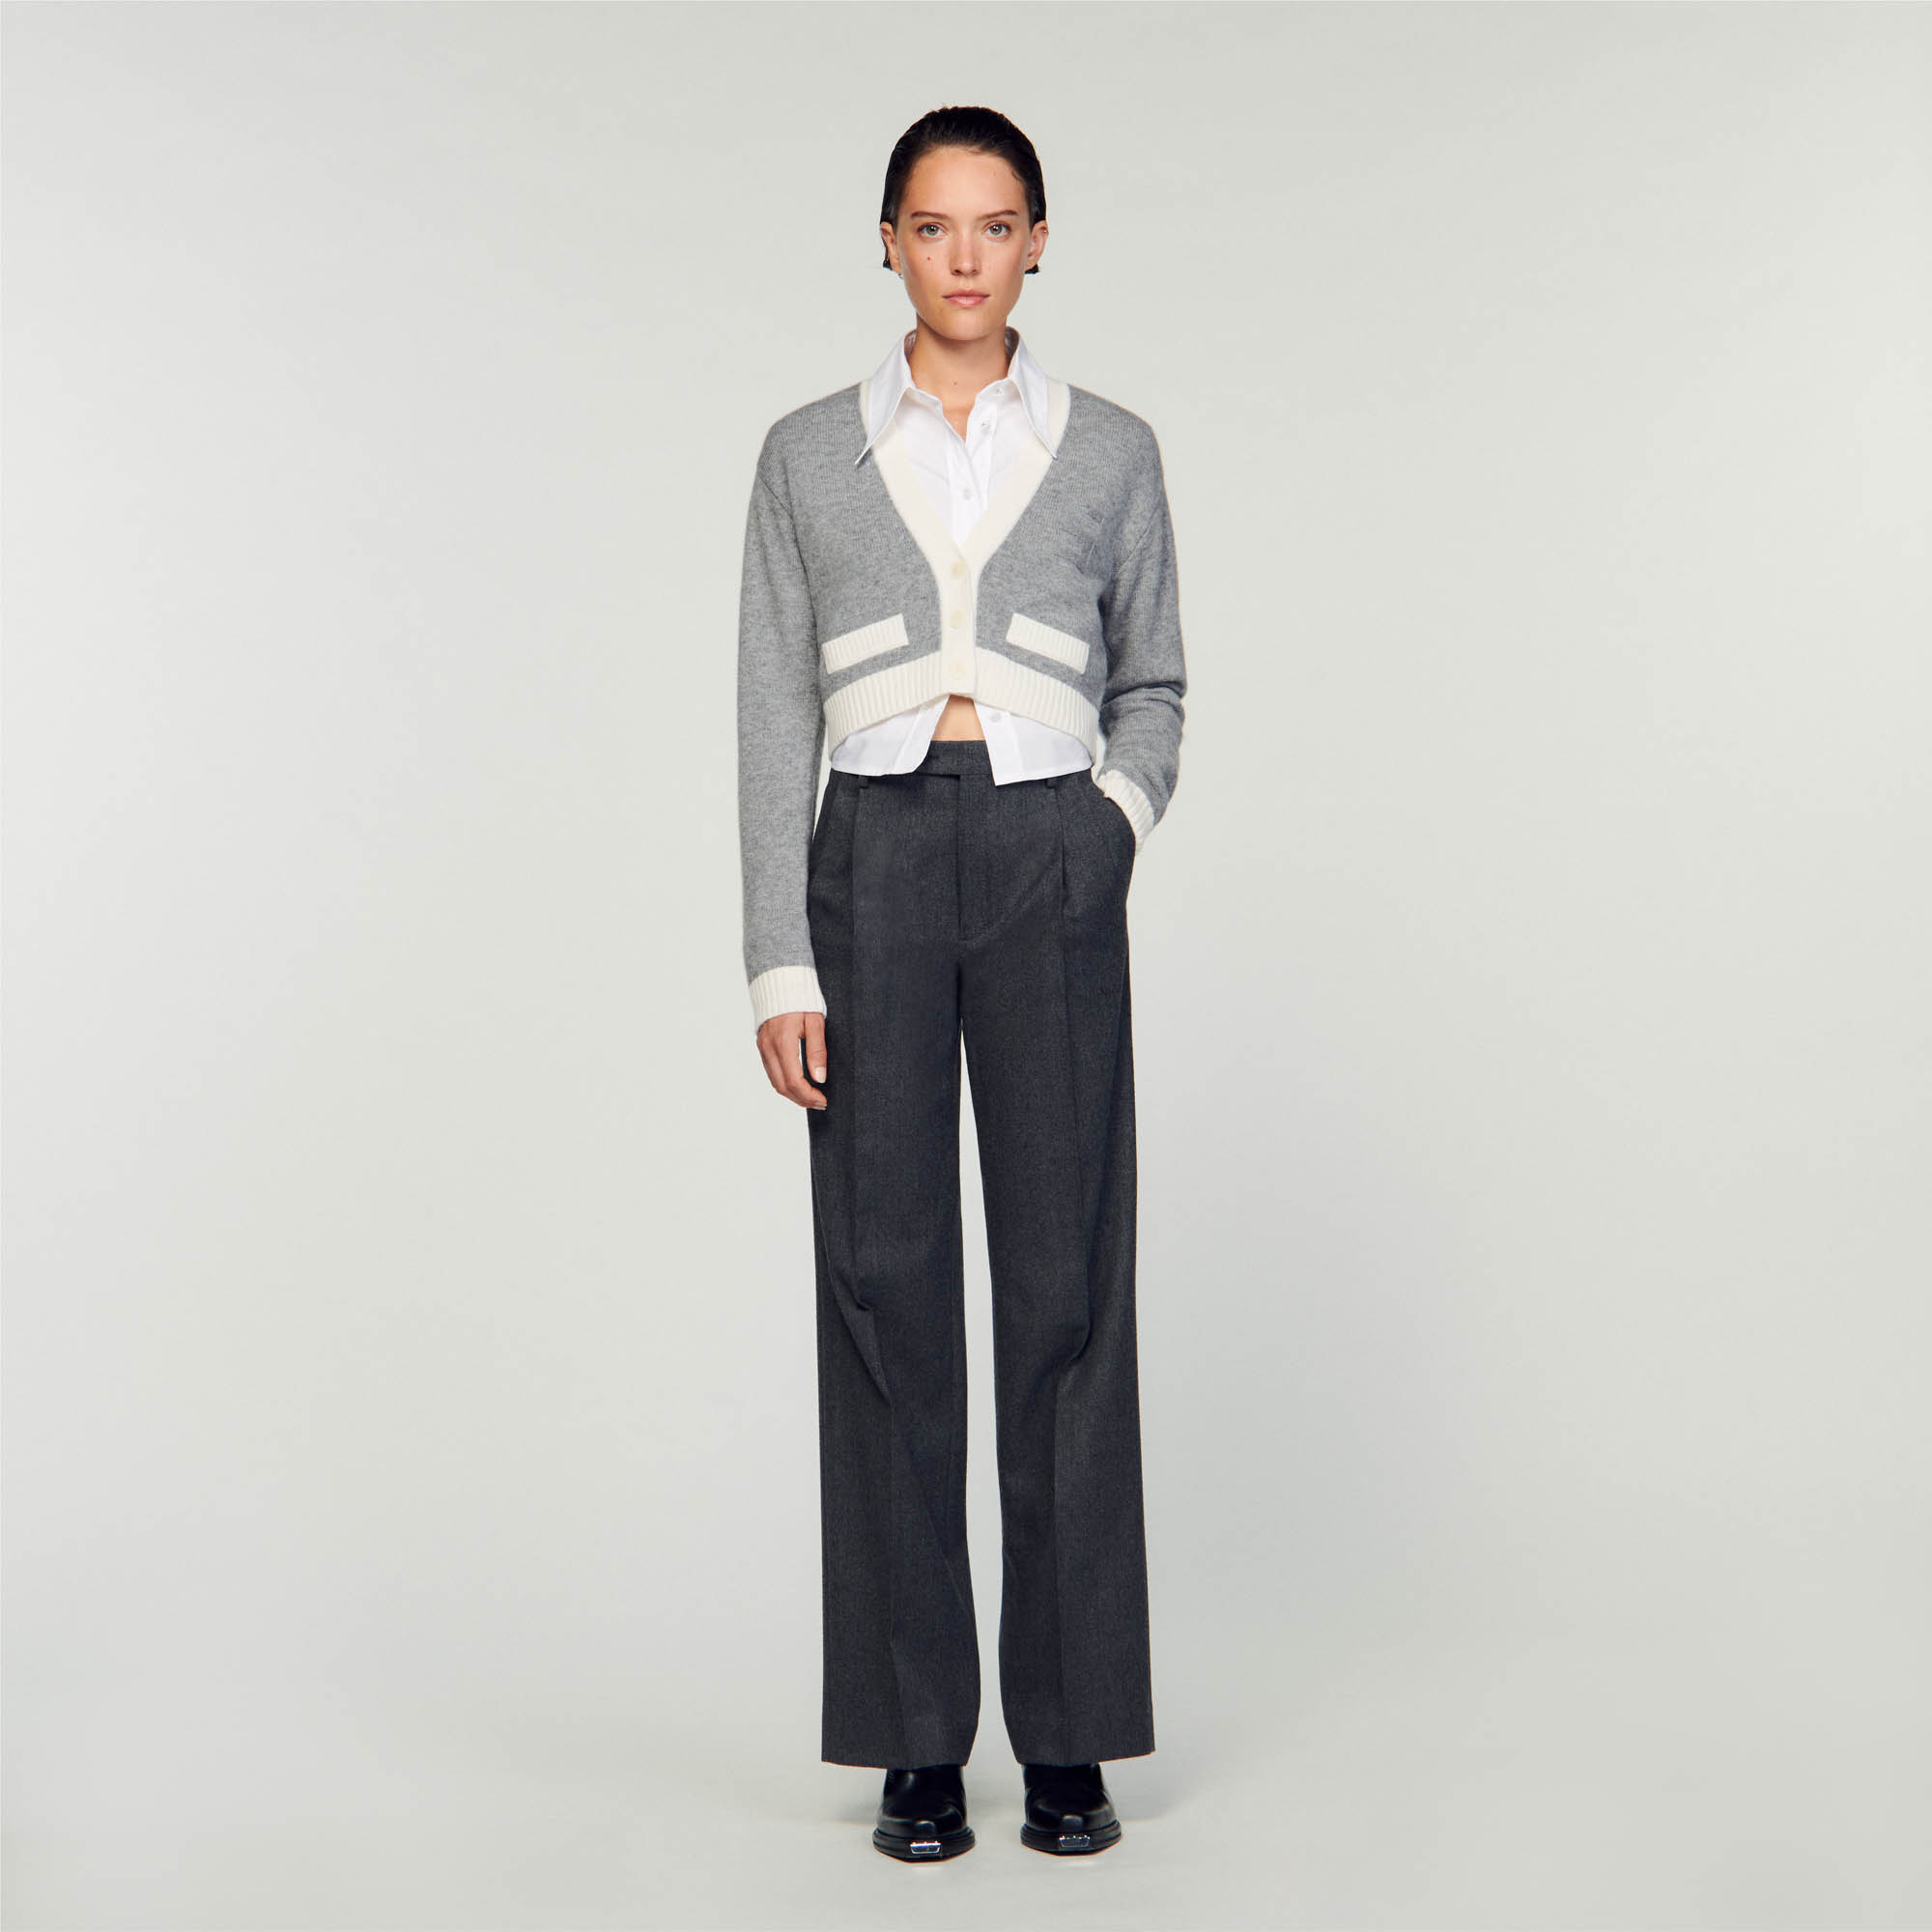 Sandro wool S knit cropped cardigan in wool and cashmere, with a round collar, long sleeves and embellished with contrasting stripes and mock pockets